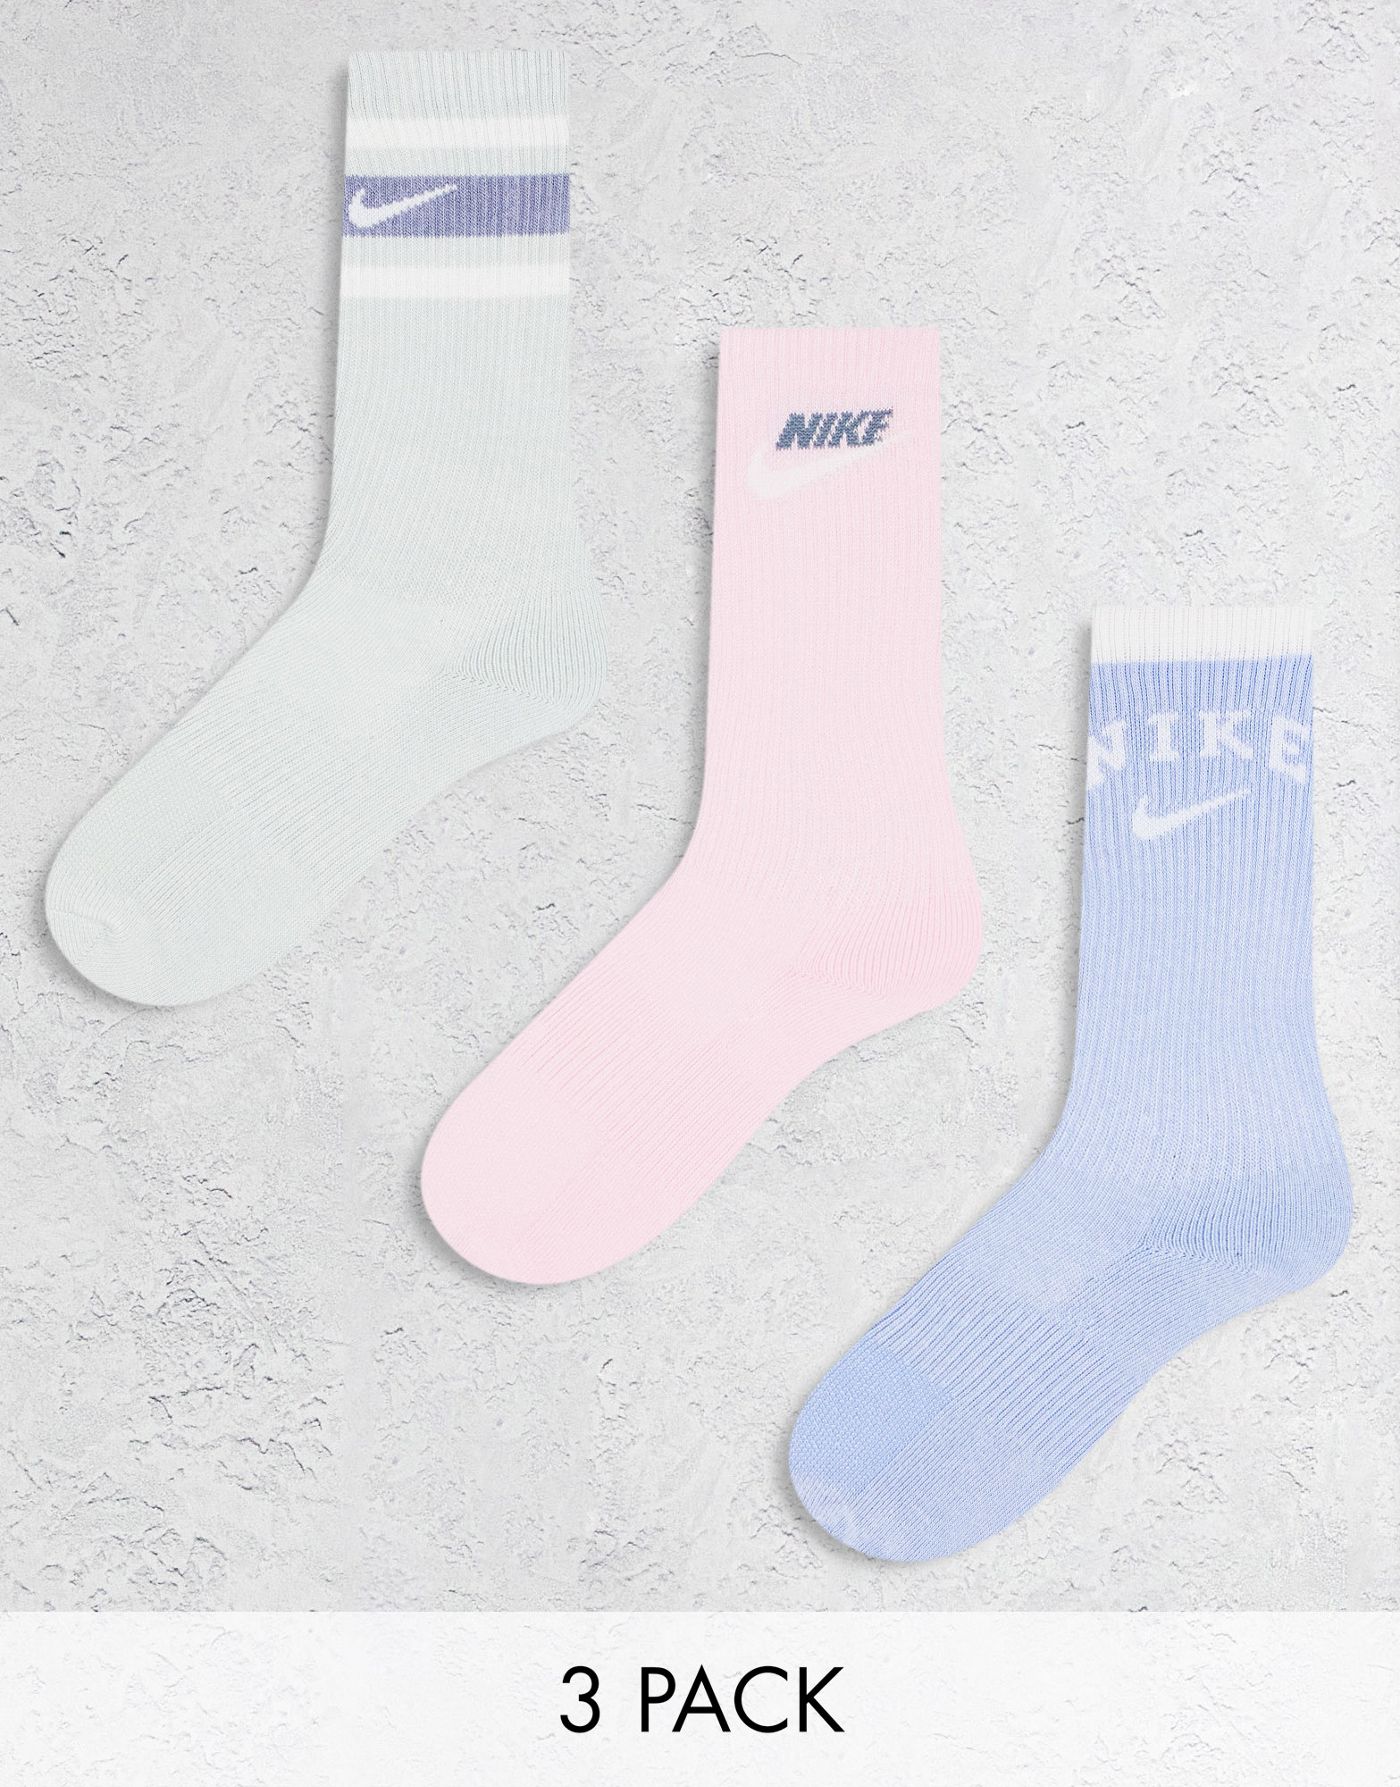 Nike Training Everyday Plus 3-pack retro socks in silver, cobalt and pink